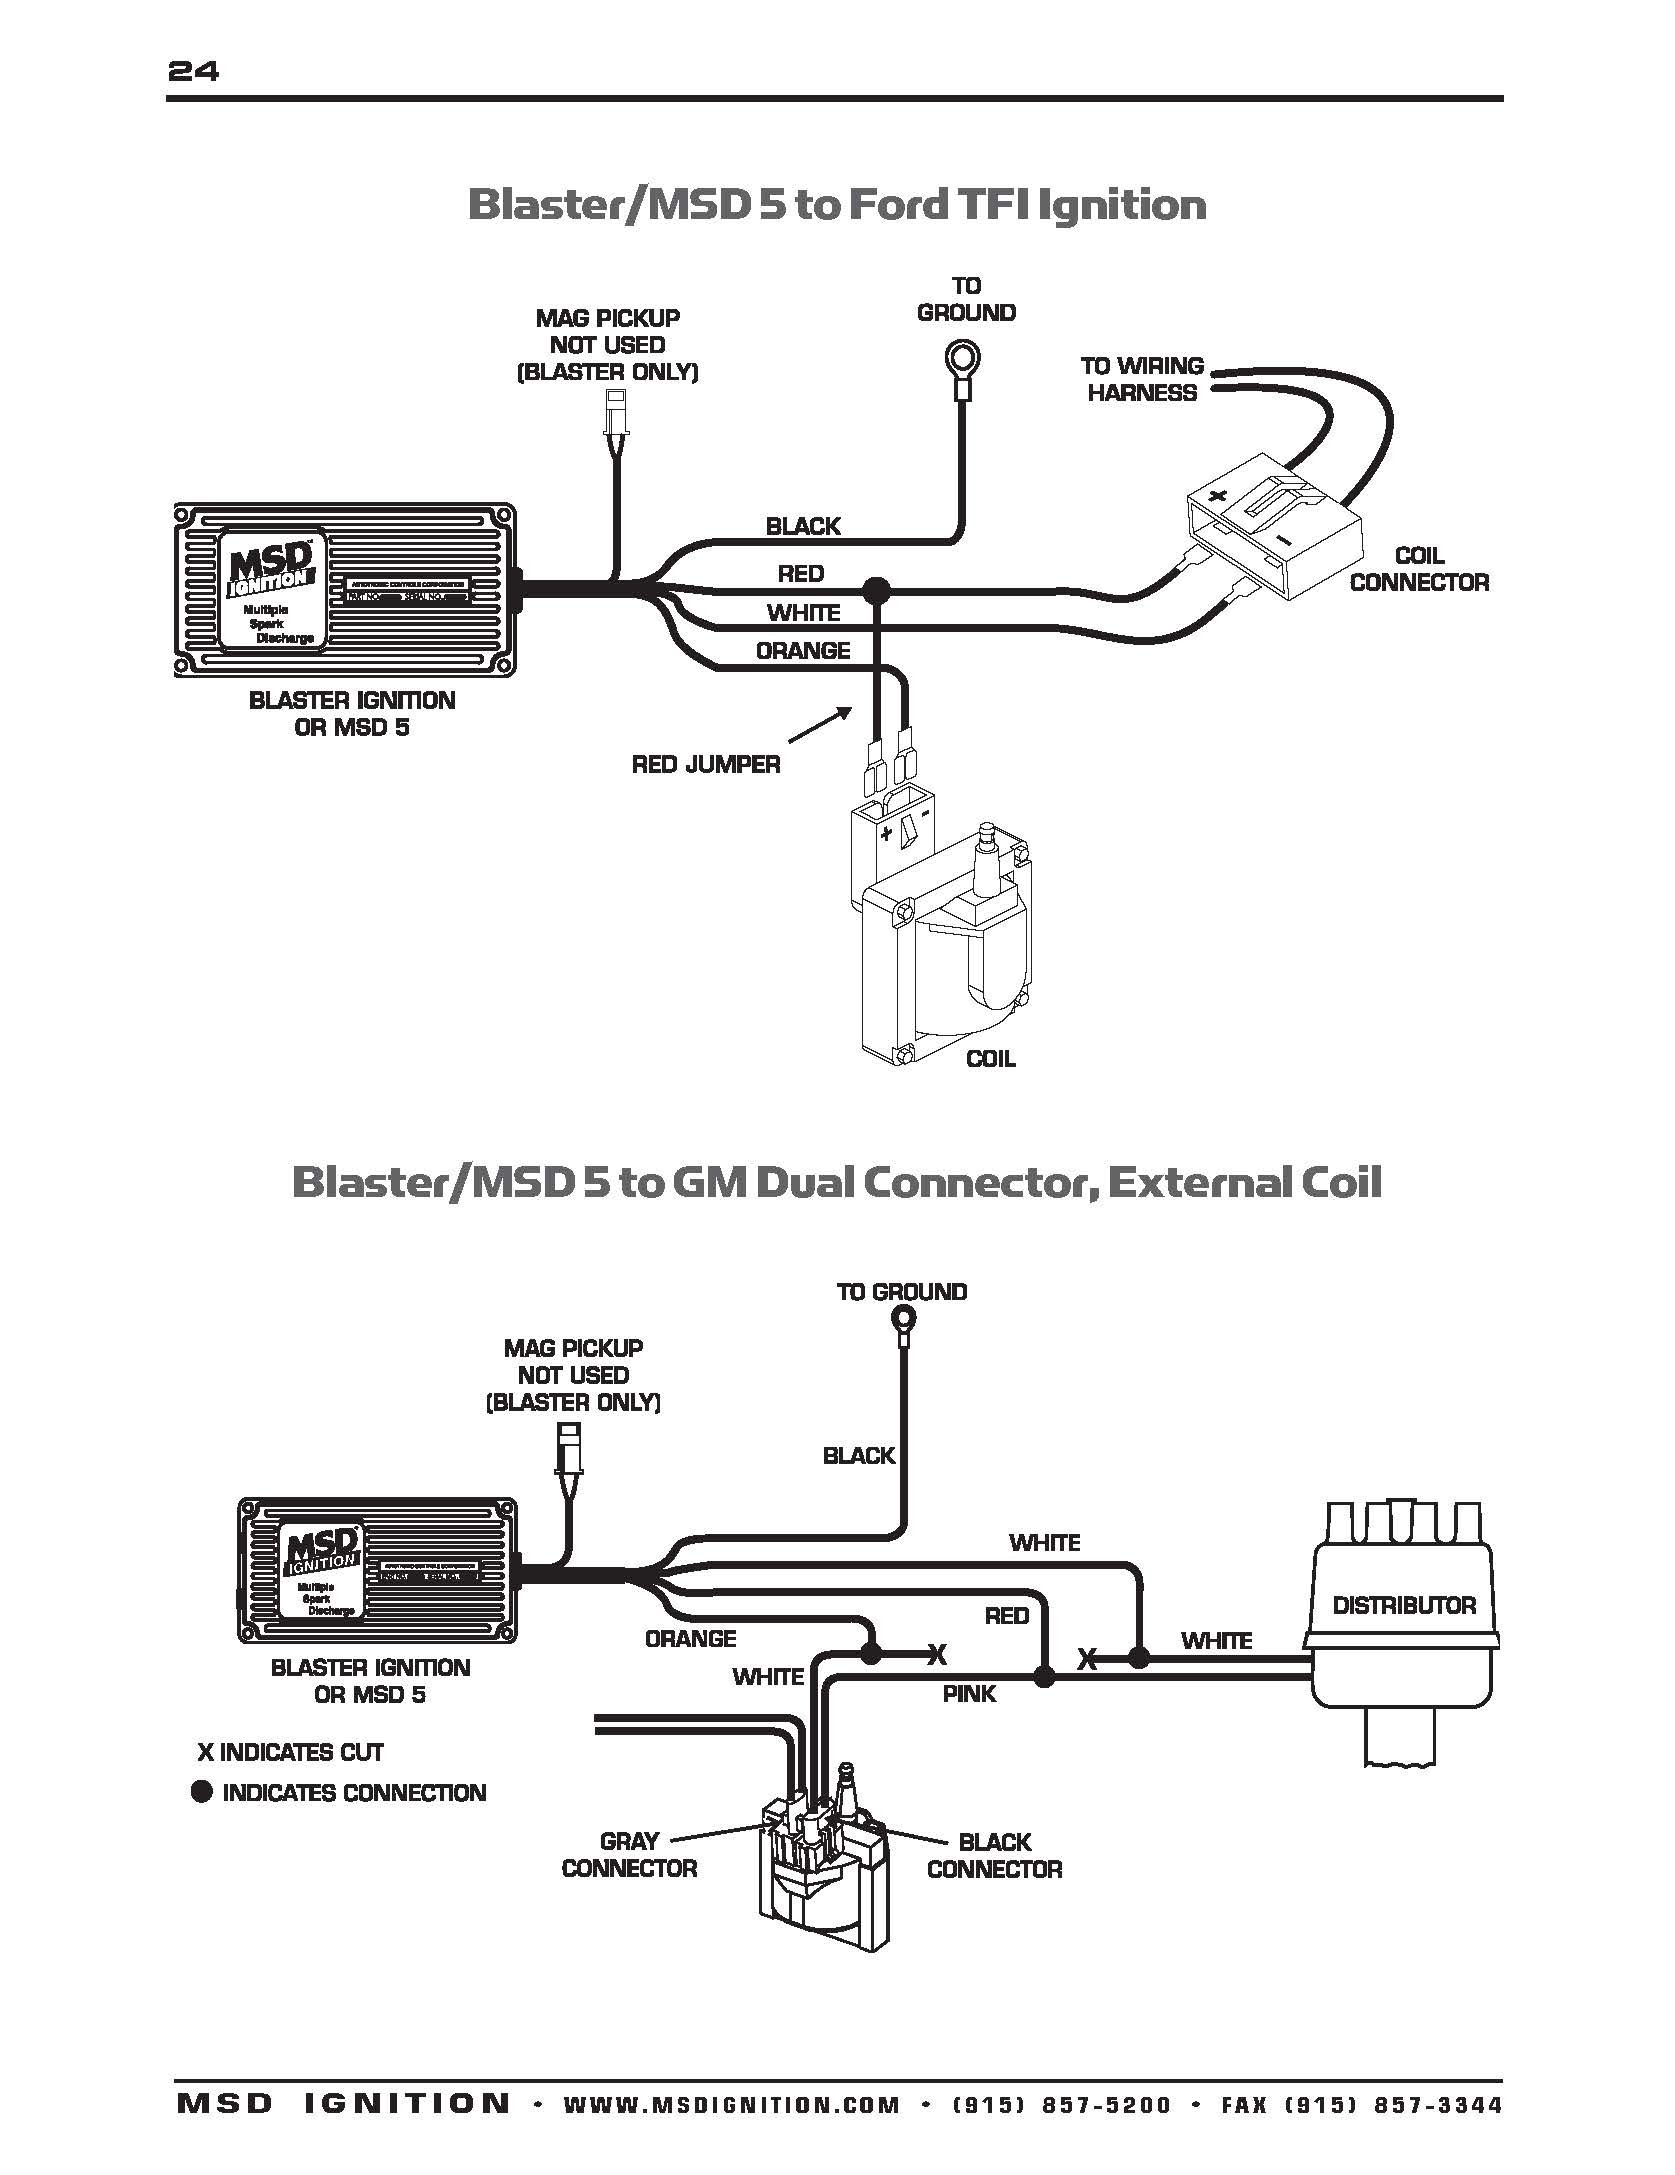 Diagram Of Coil Ignition System Ignition Coil Wiring Diagram Jerrysmasterkeyforyouand Of Diagram Of Coil Ignition System